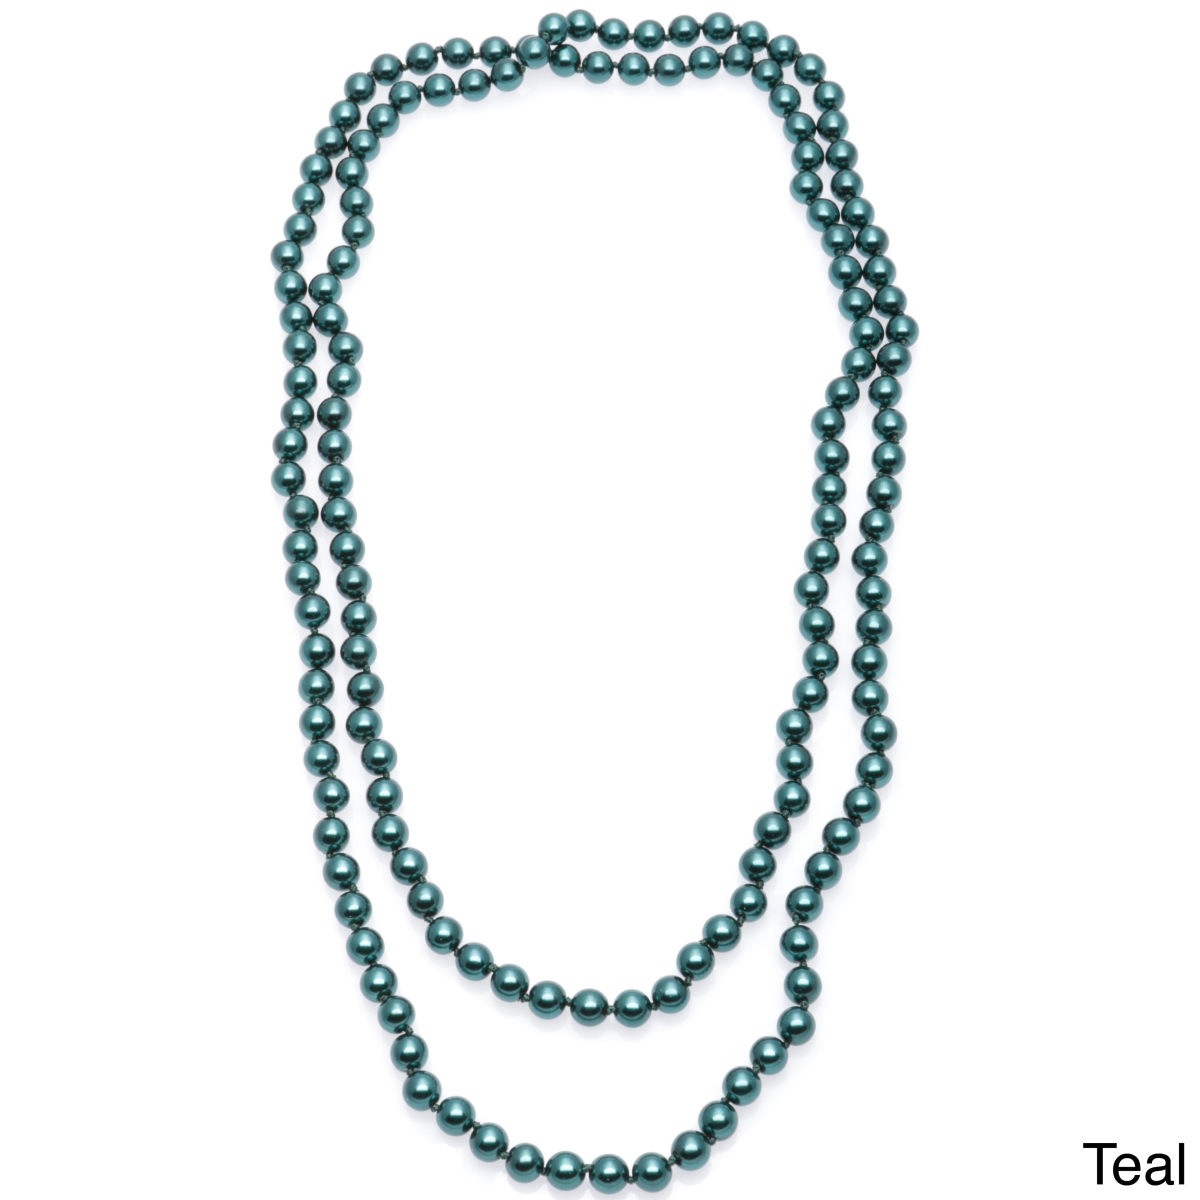 Picture of J&H Designs 854-N-Teal Hand-knotted Endless 54-inch Glass Pearl Necklace (8-9 mm)